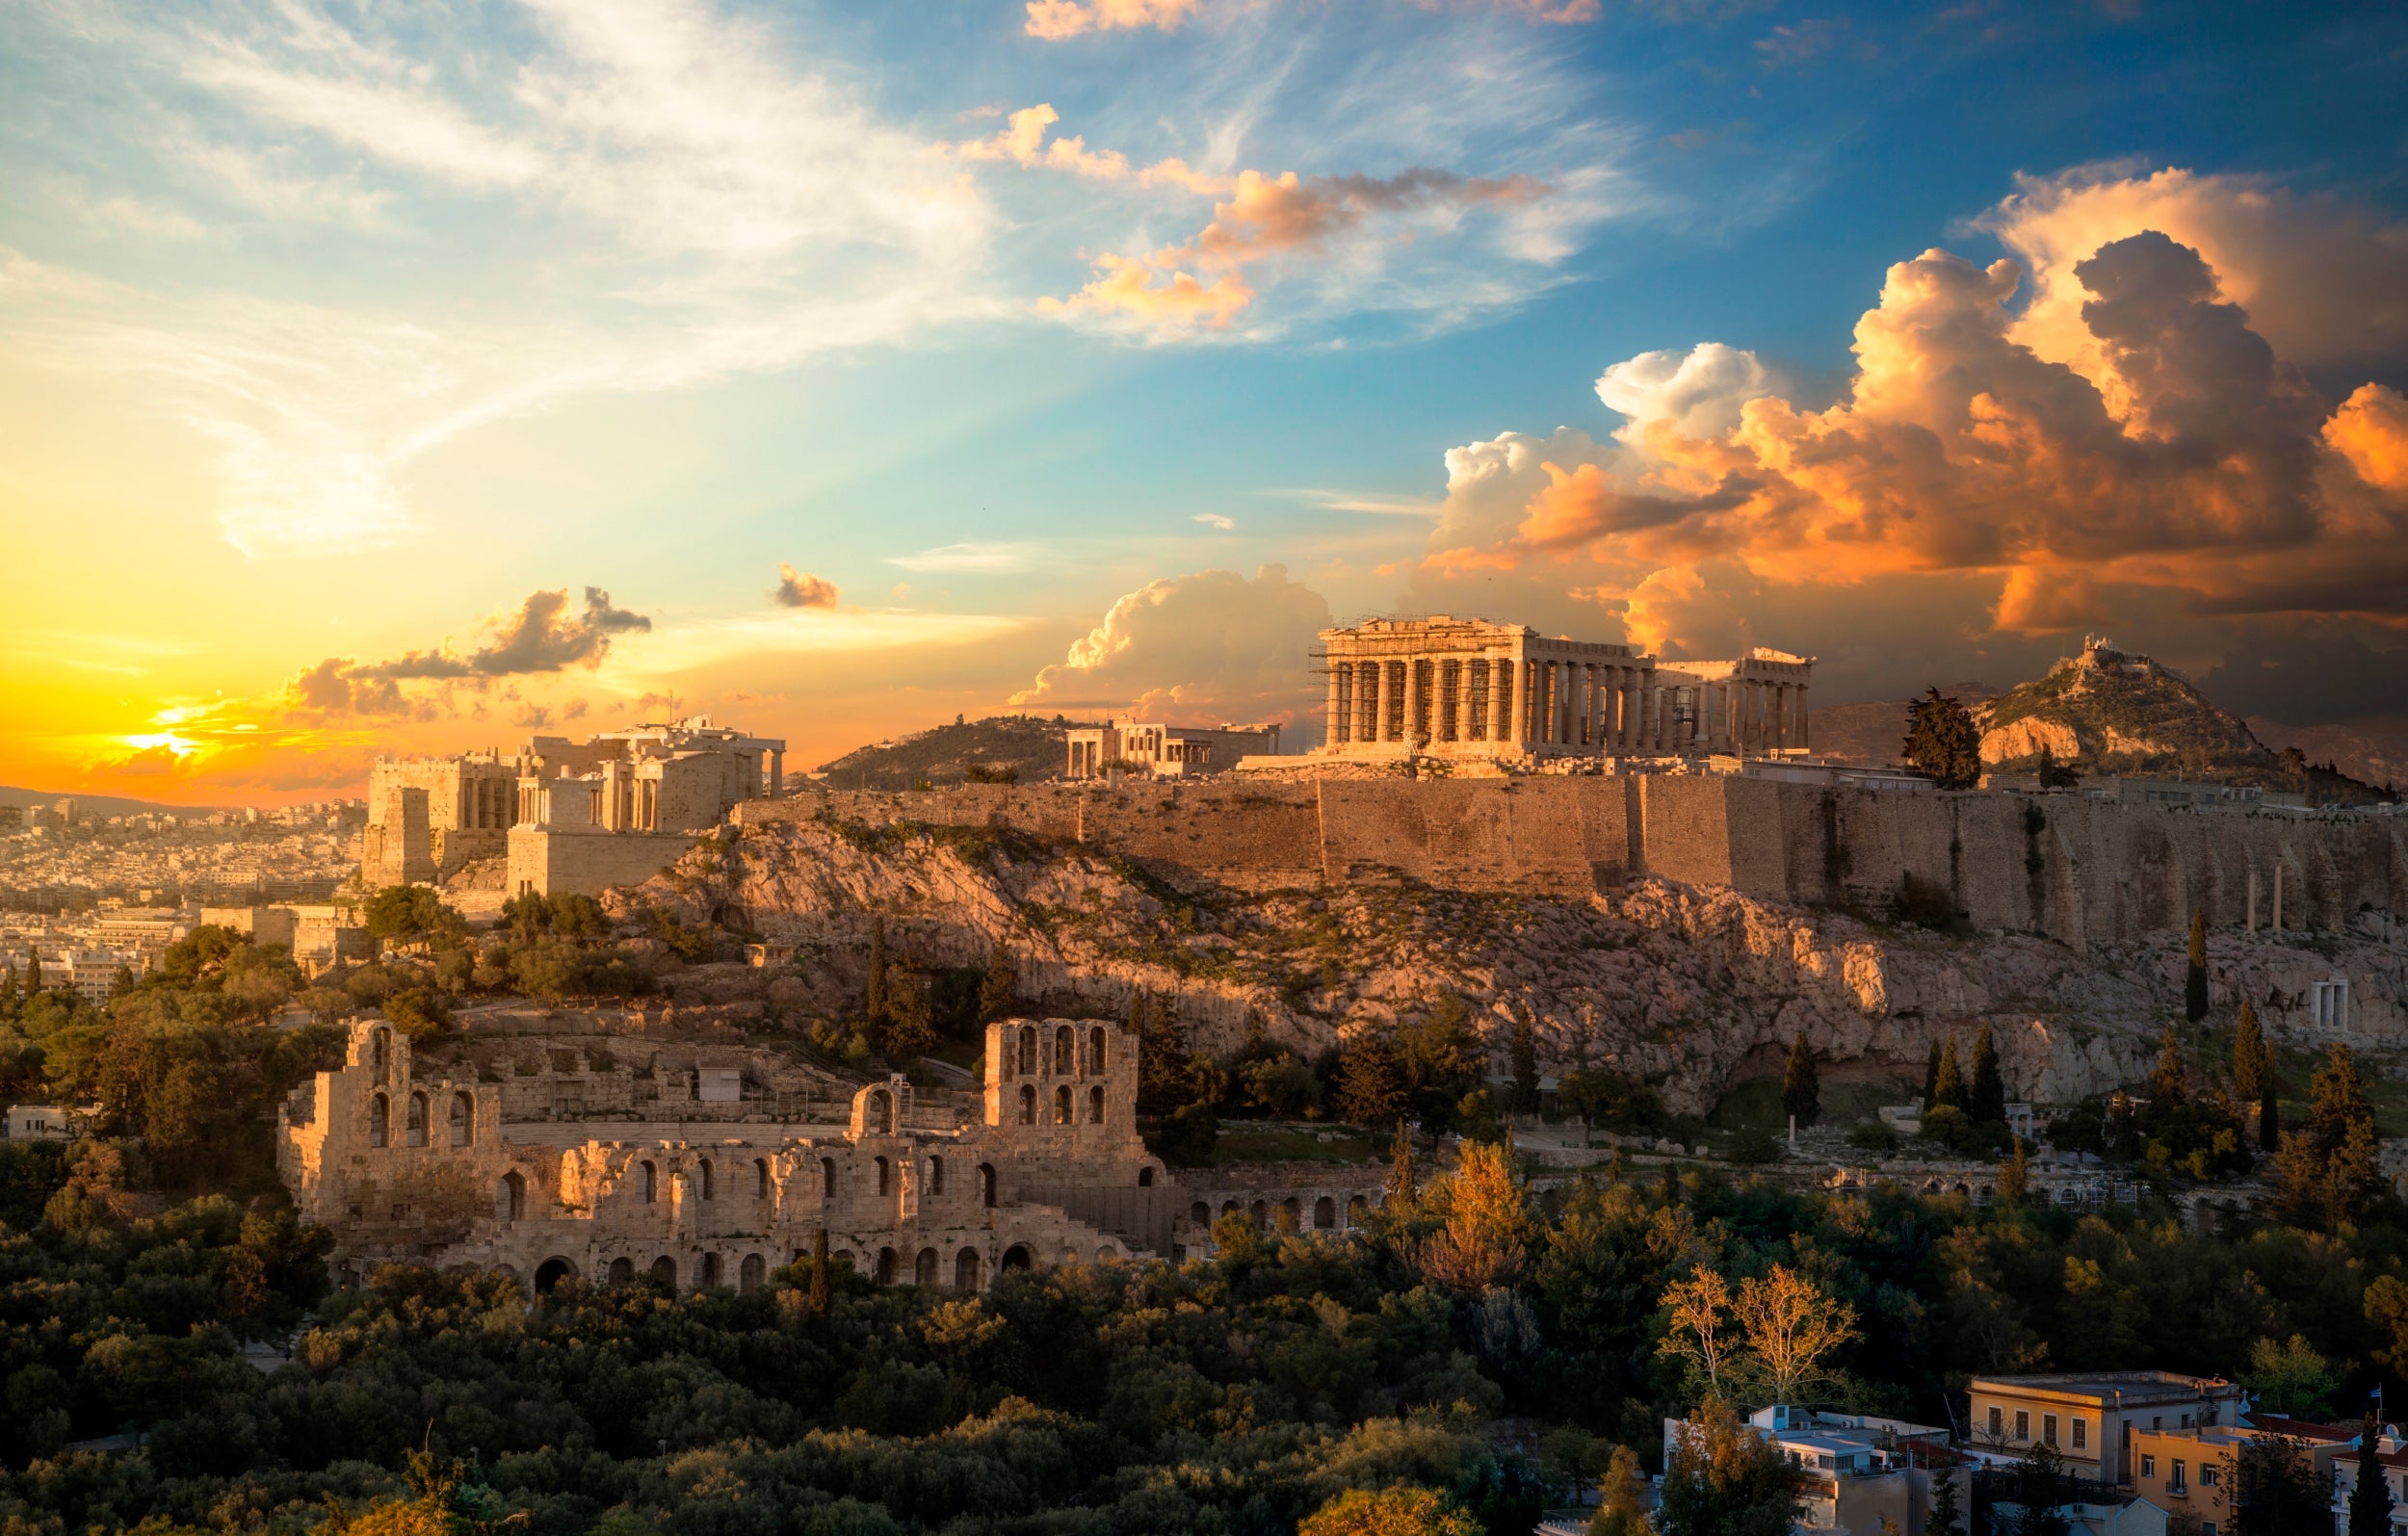 The Athens Acropolis that gazes over the city